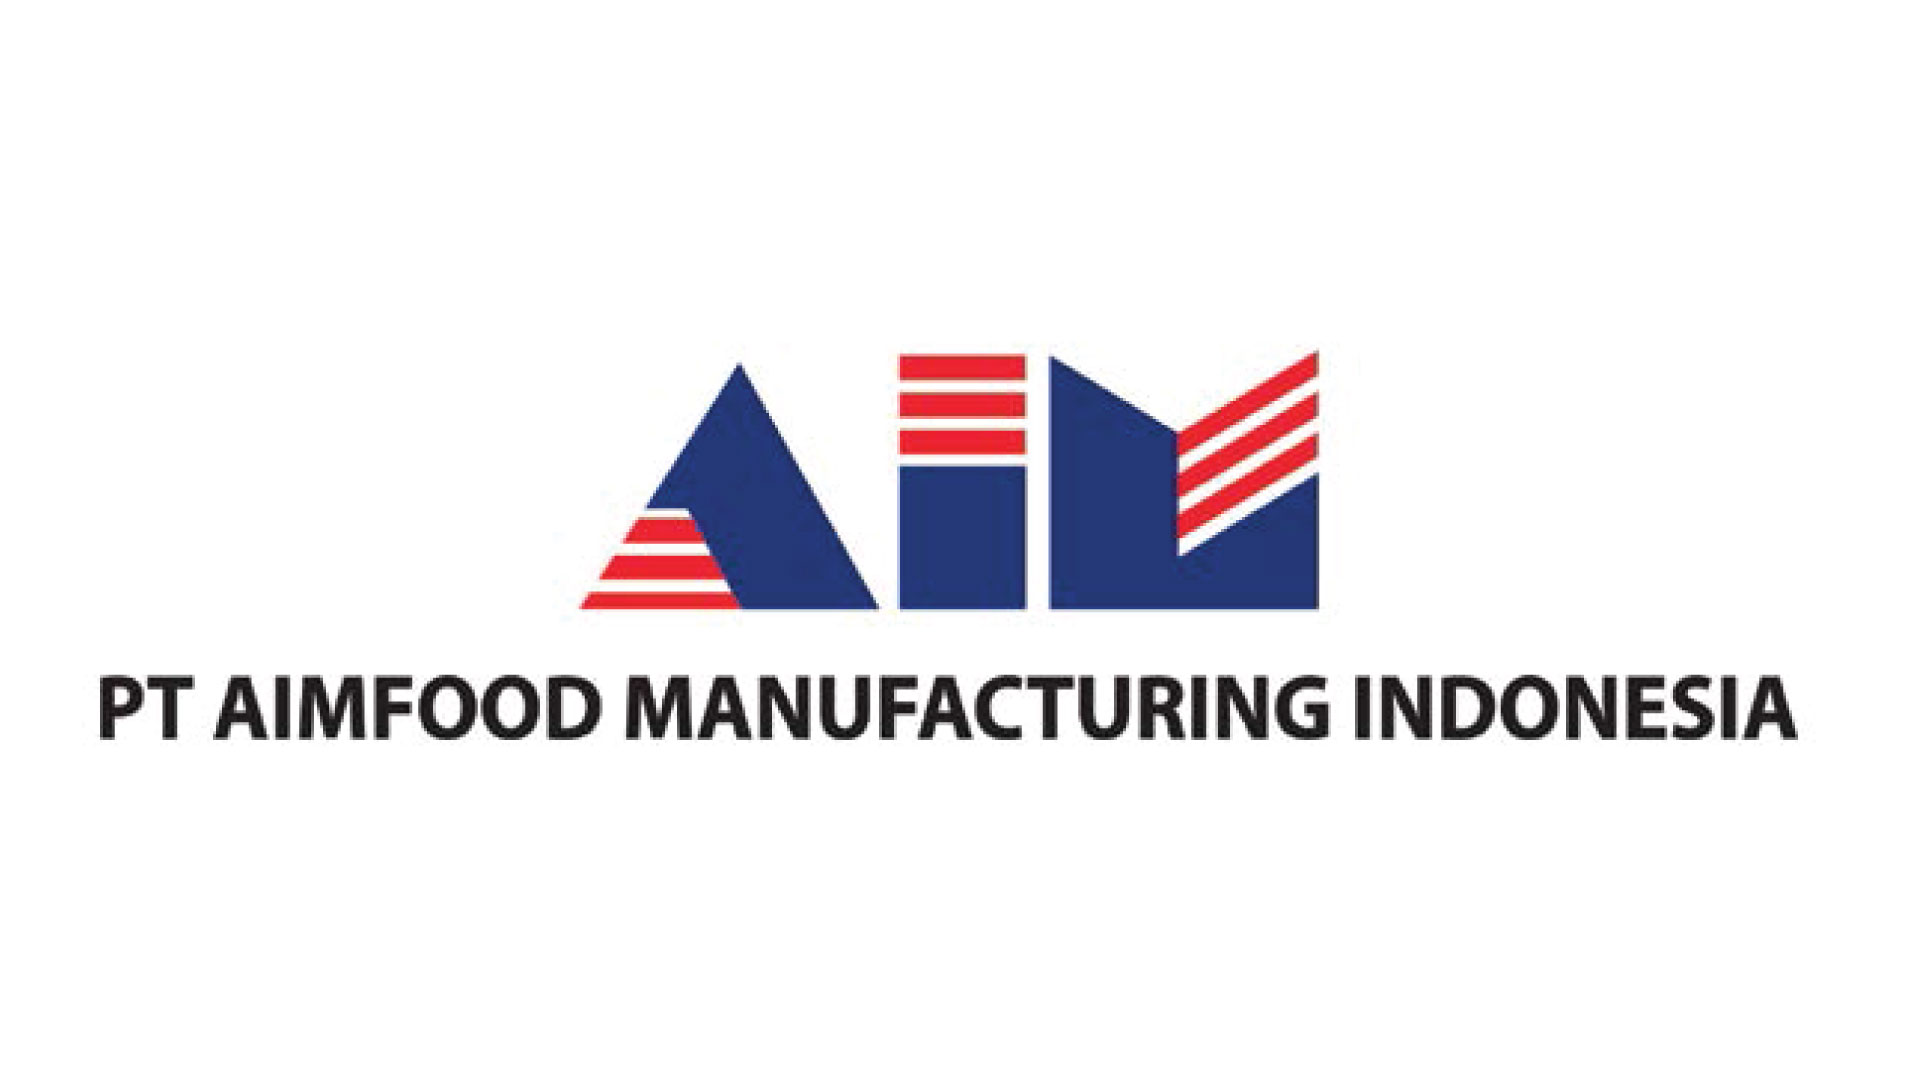 PT AIMFOOD MANUFACTURING INDONESIA